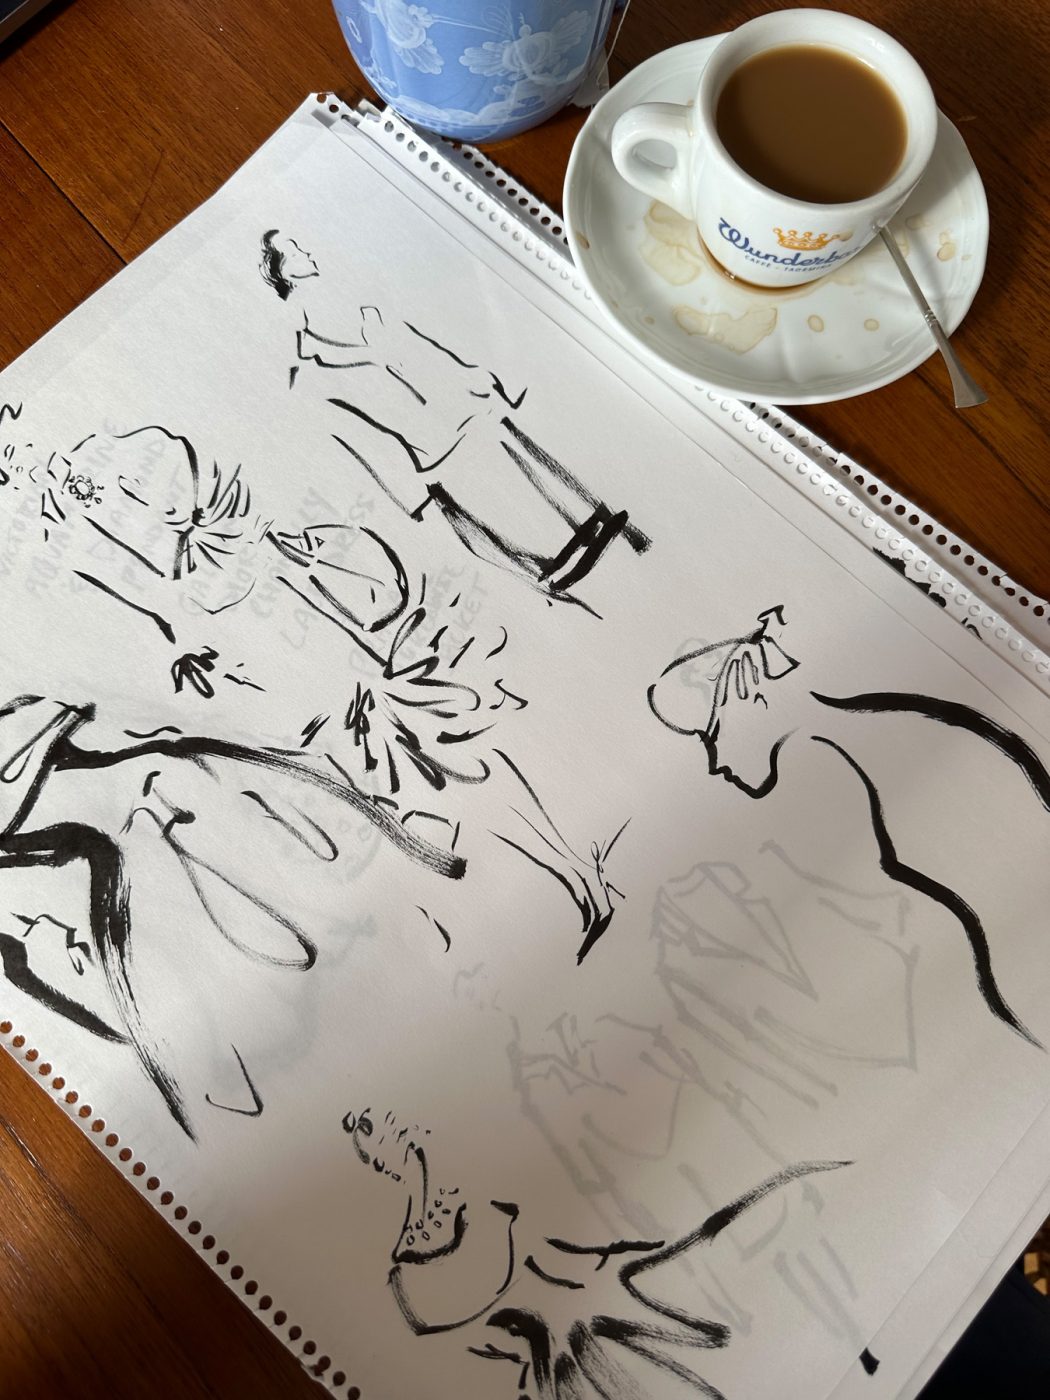 Pages of black-and-white sketches from Jenny Walton's notebook lying a wooden table next to a cup of coffee